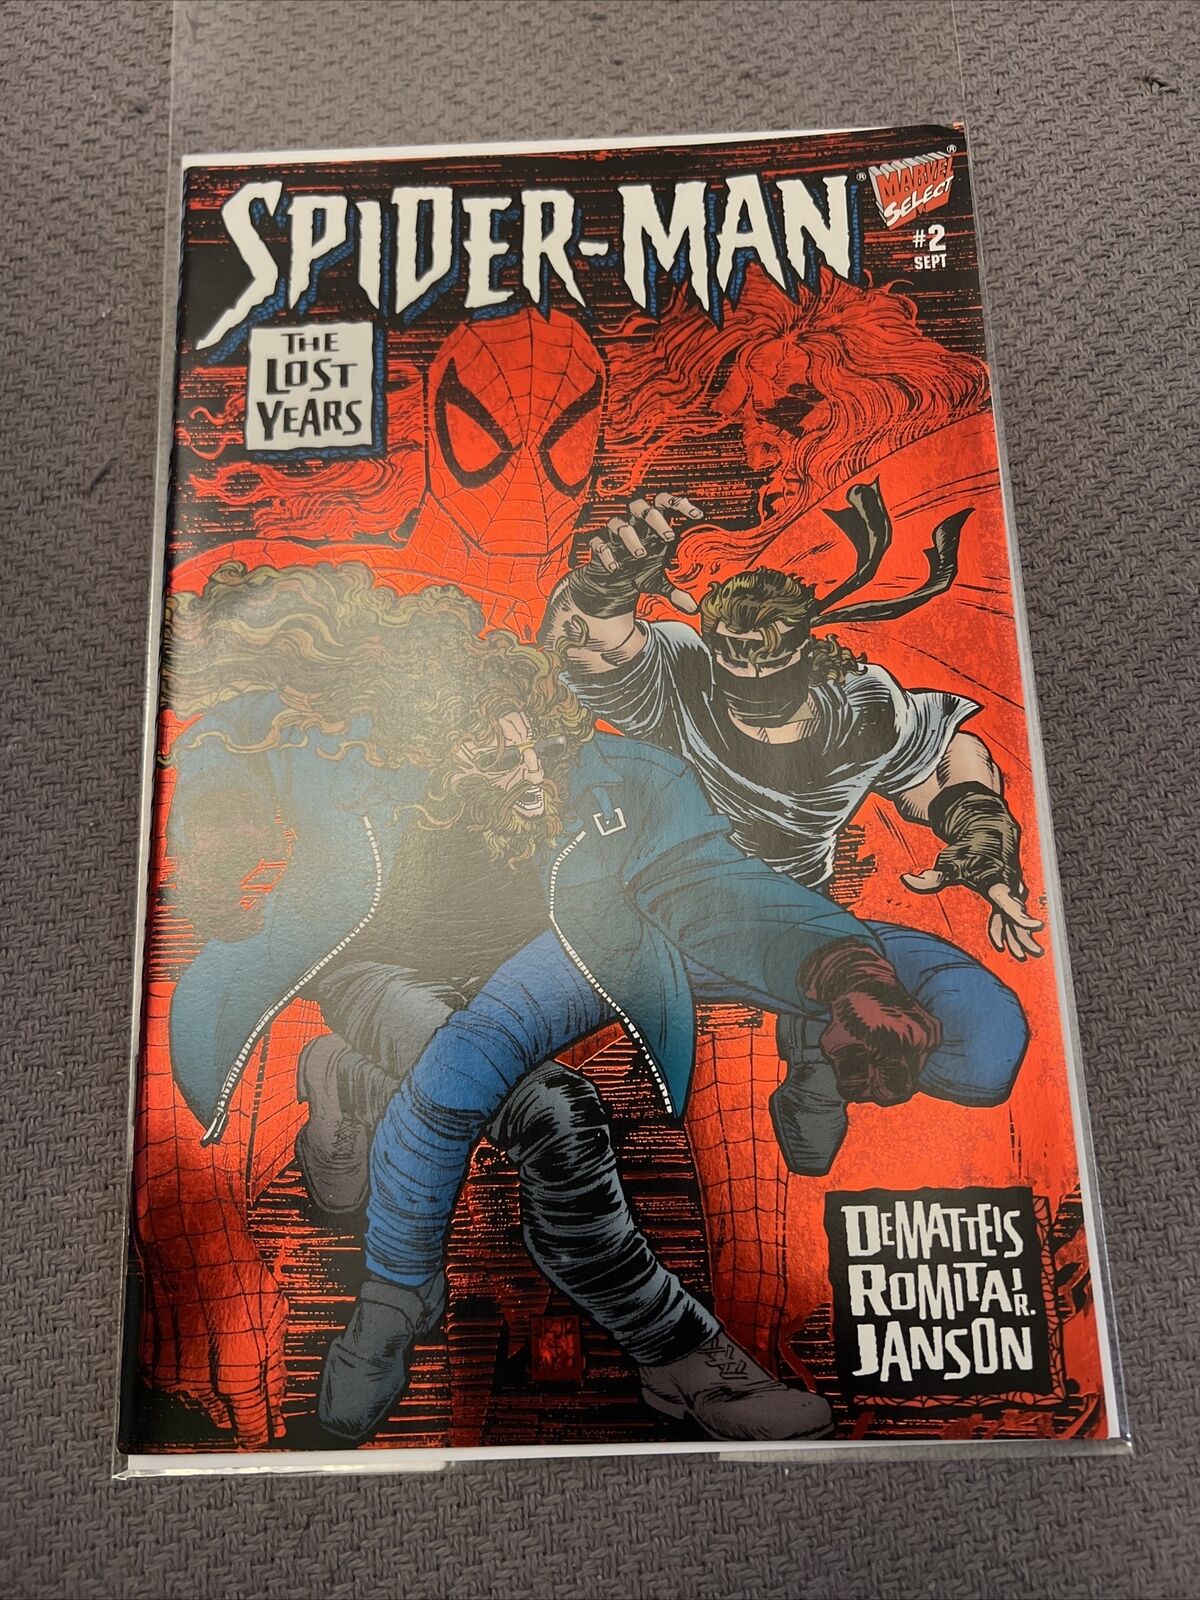 Spider-Man: The Lost Years #2 (Marvel 1995) Ben Reilly Will Combine Shipping